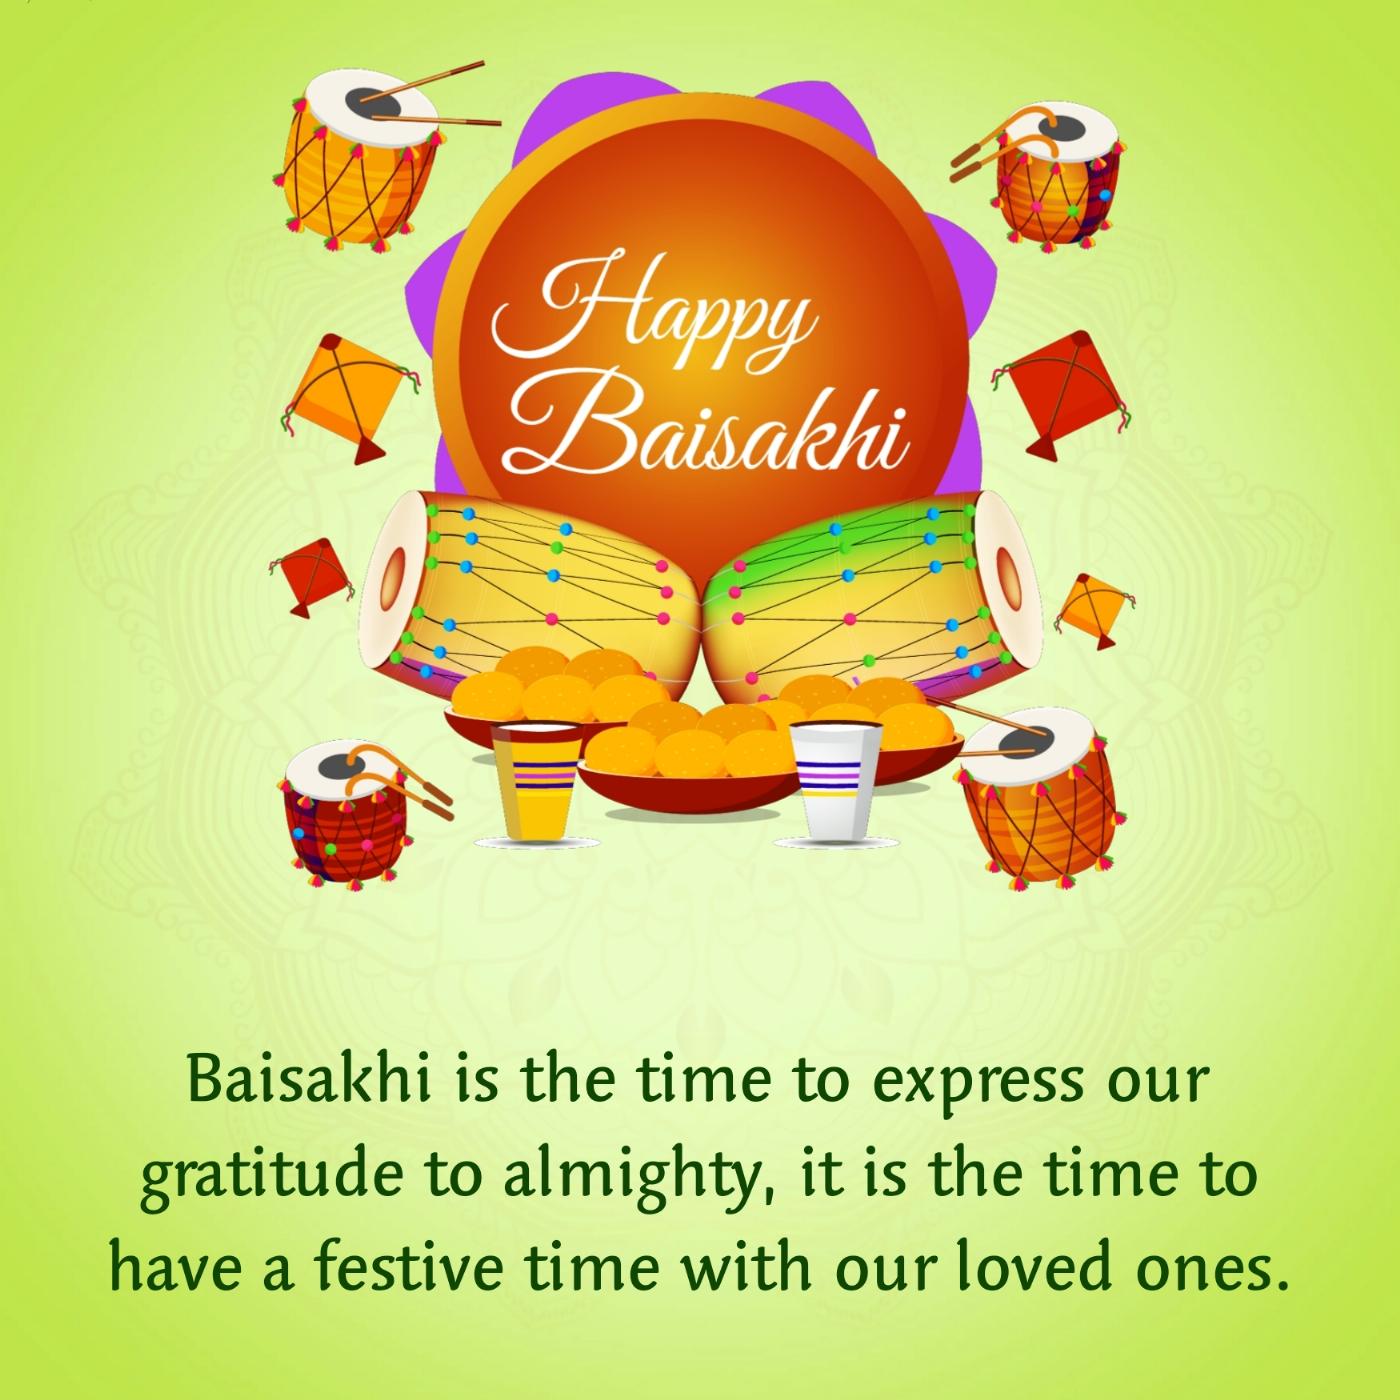 Baisakhi is the time to express our gratitude to almighty